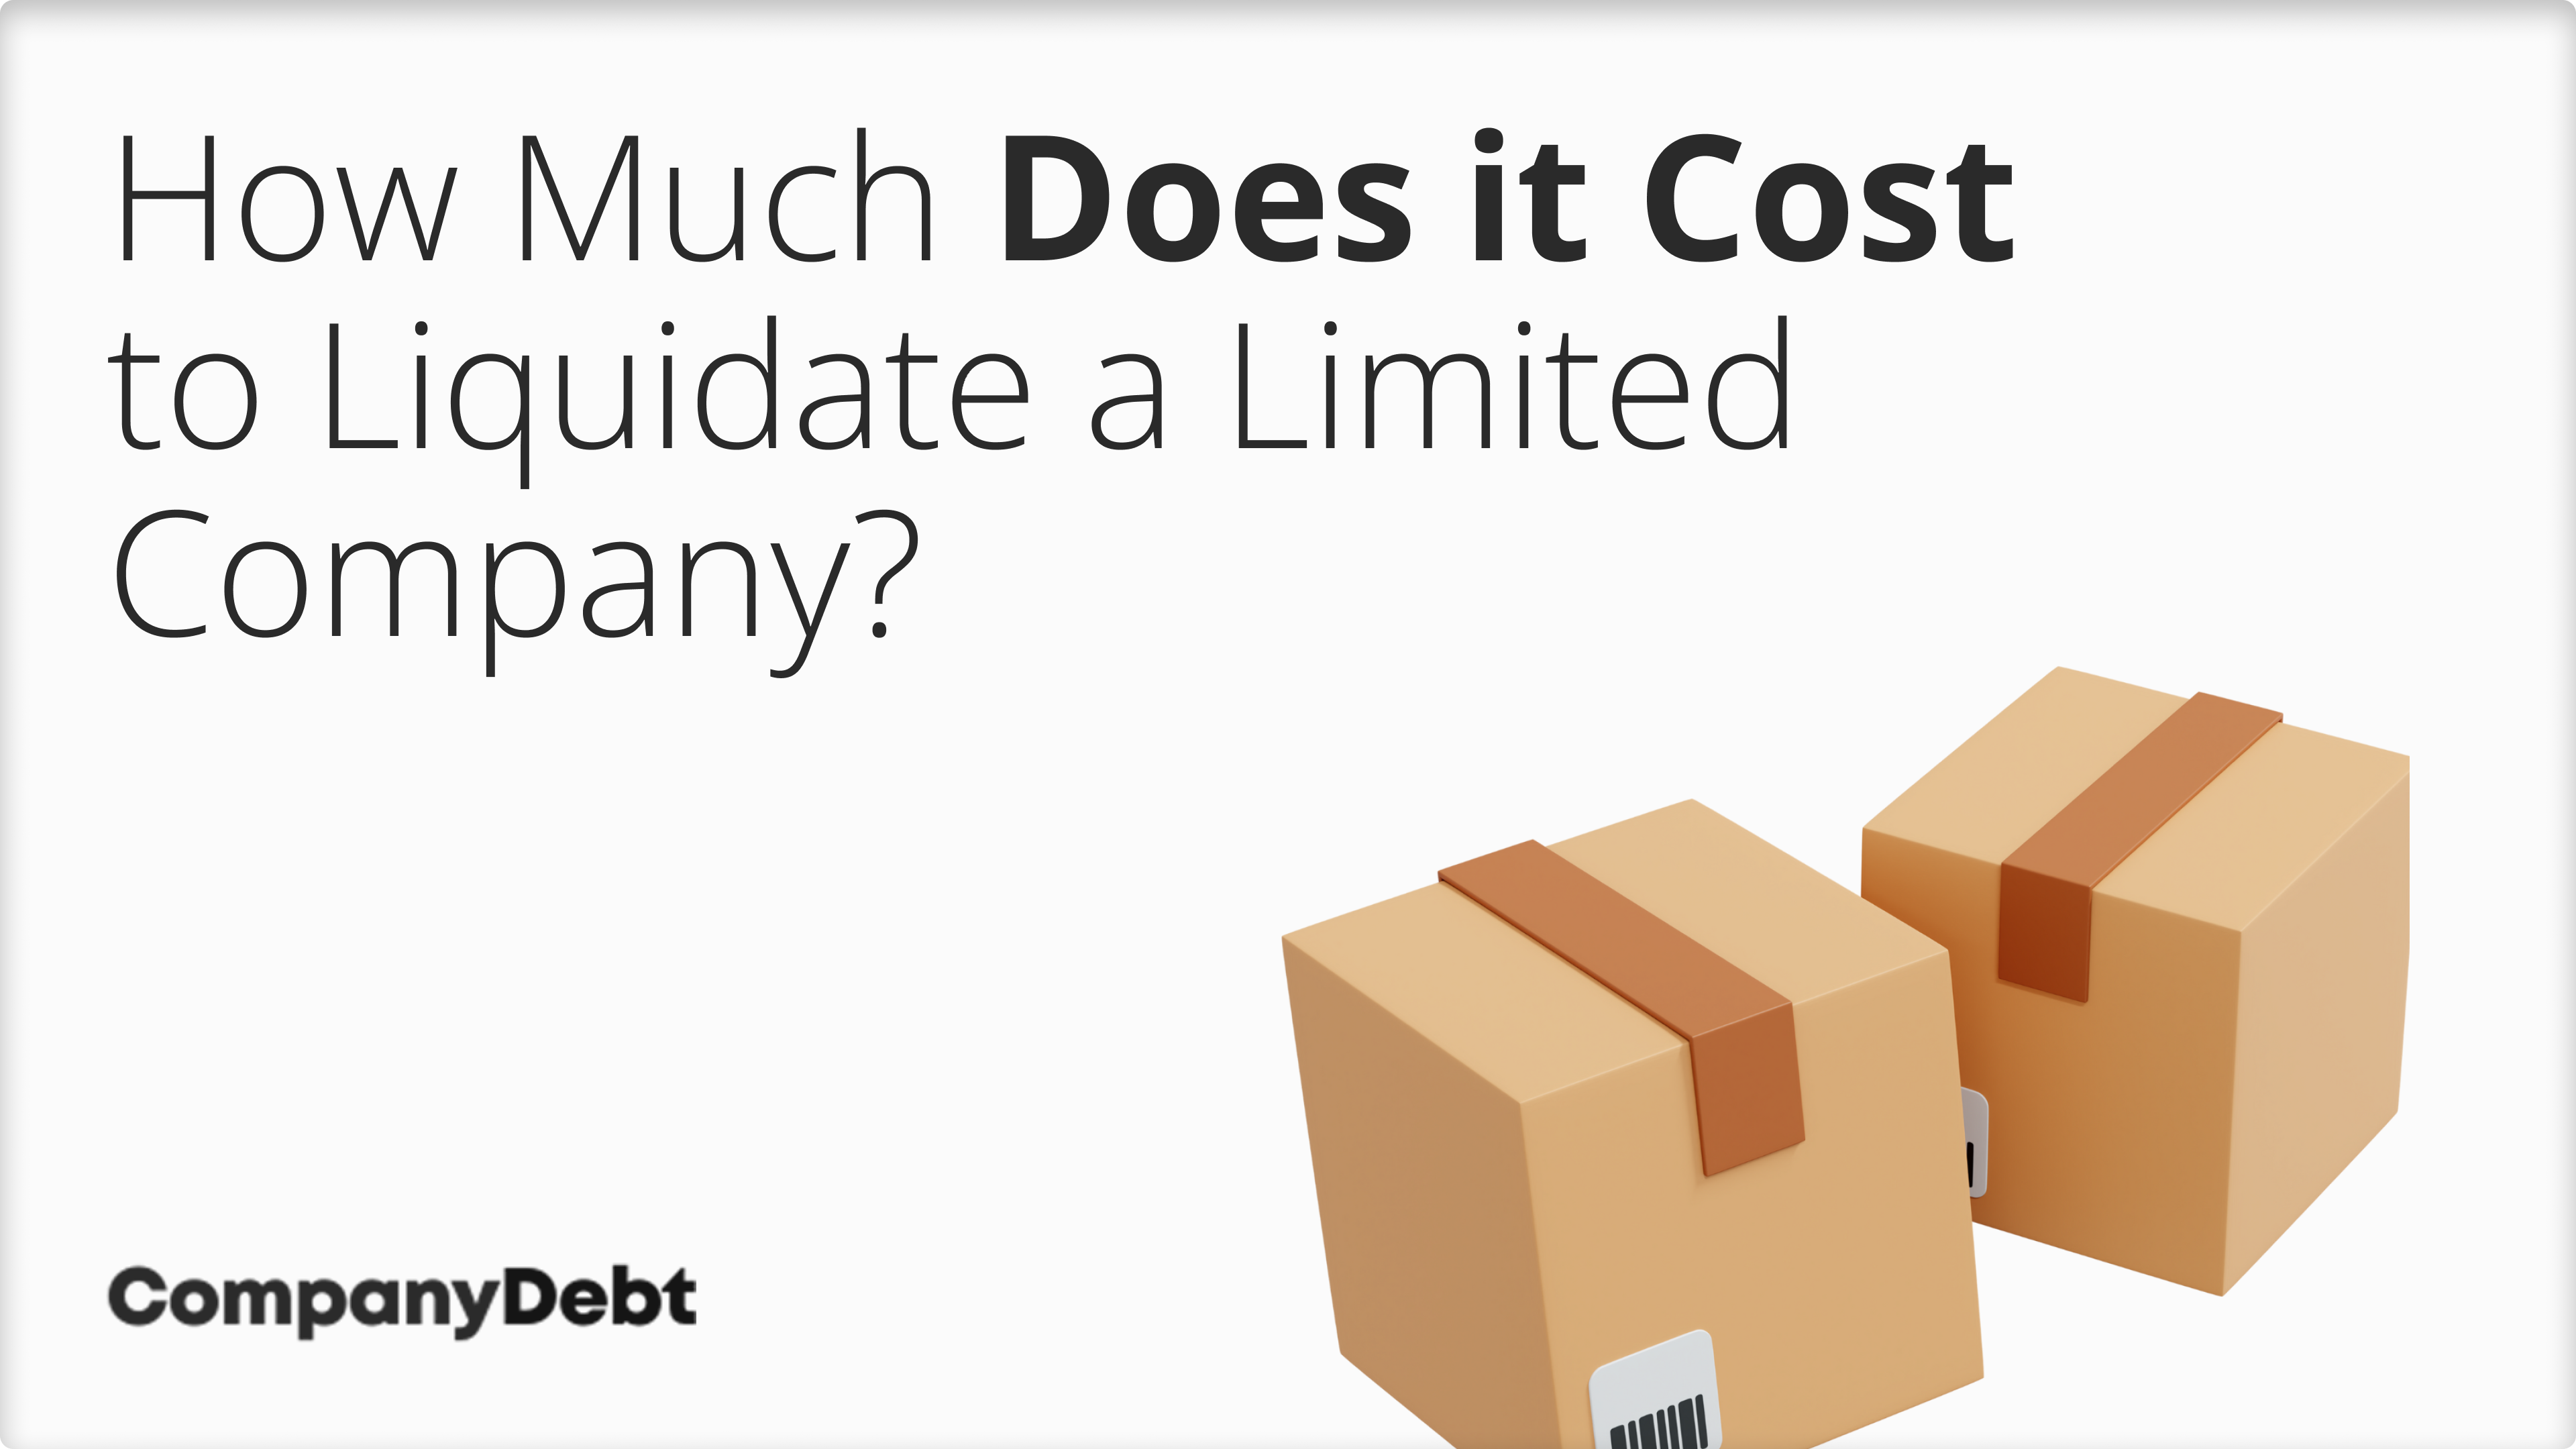 How-Much-Does-it-Cost-to-Liquidate-a-Limited-Company_